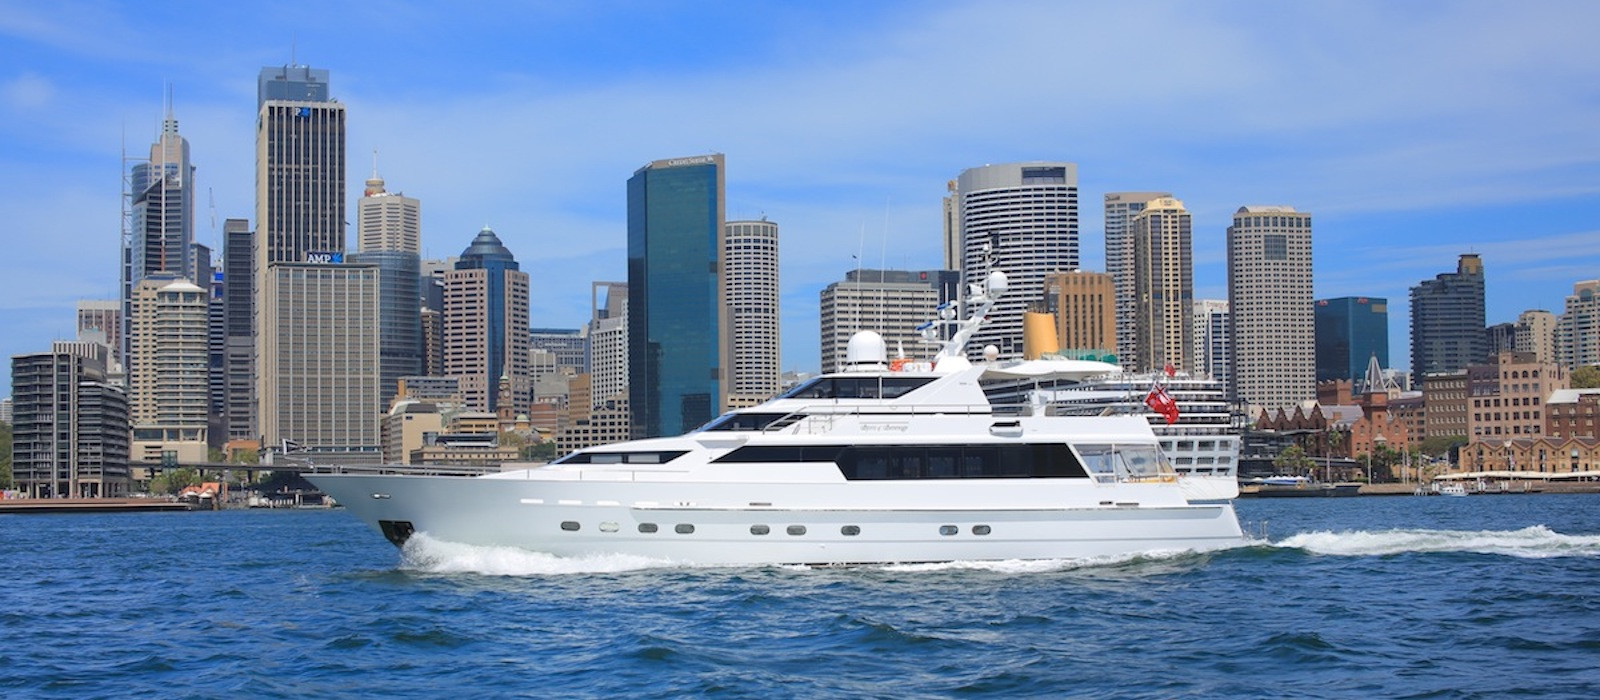 Oscar II luxury boat hire with cityscape background